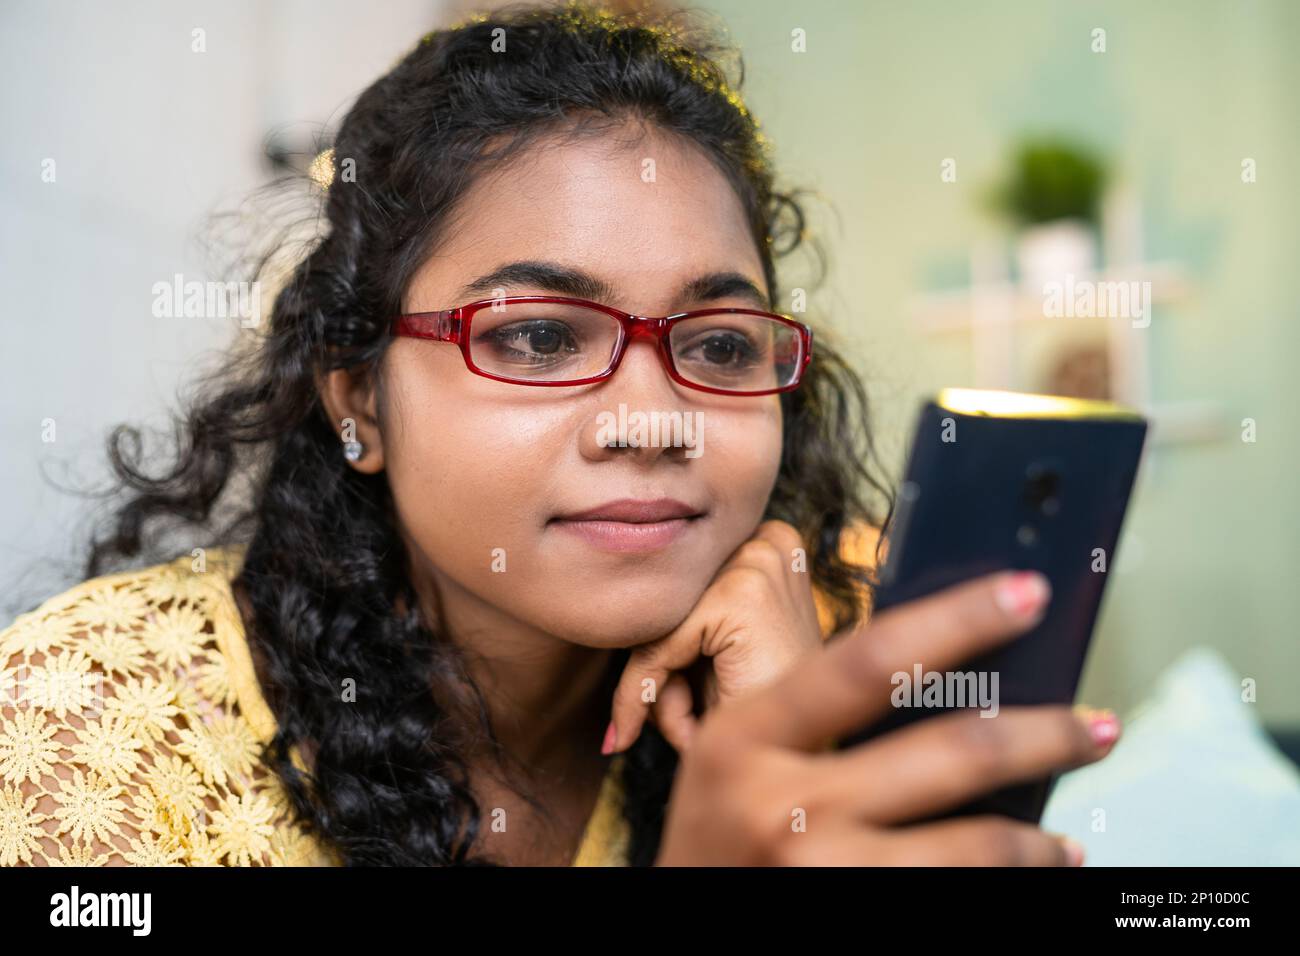 close up shot of young girl with eyeglasses using social media on mobile phone while sitting on sofa at home - concept of social media sharing Stock Photo